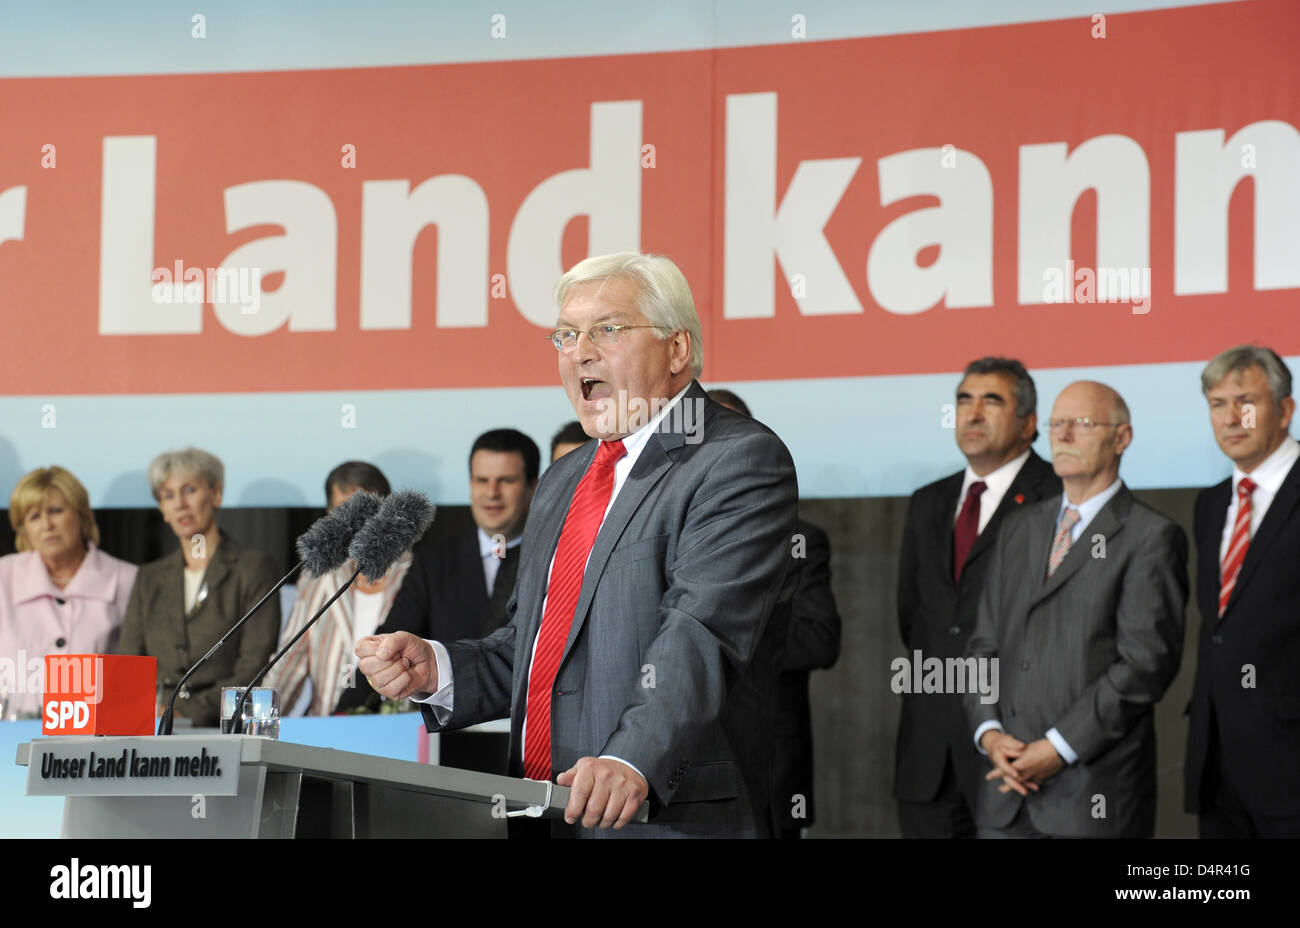 Frank-Walter Steinmeier, German Foreign Minister and top candidate for Social Democrats (SPD), delivers a speech during an SPD election campaign event in Berlin, Germany, 25 September 2009. Federal elections are held on 27 September 2009. Photo: RAINER JENSEN Stock Photo